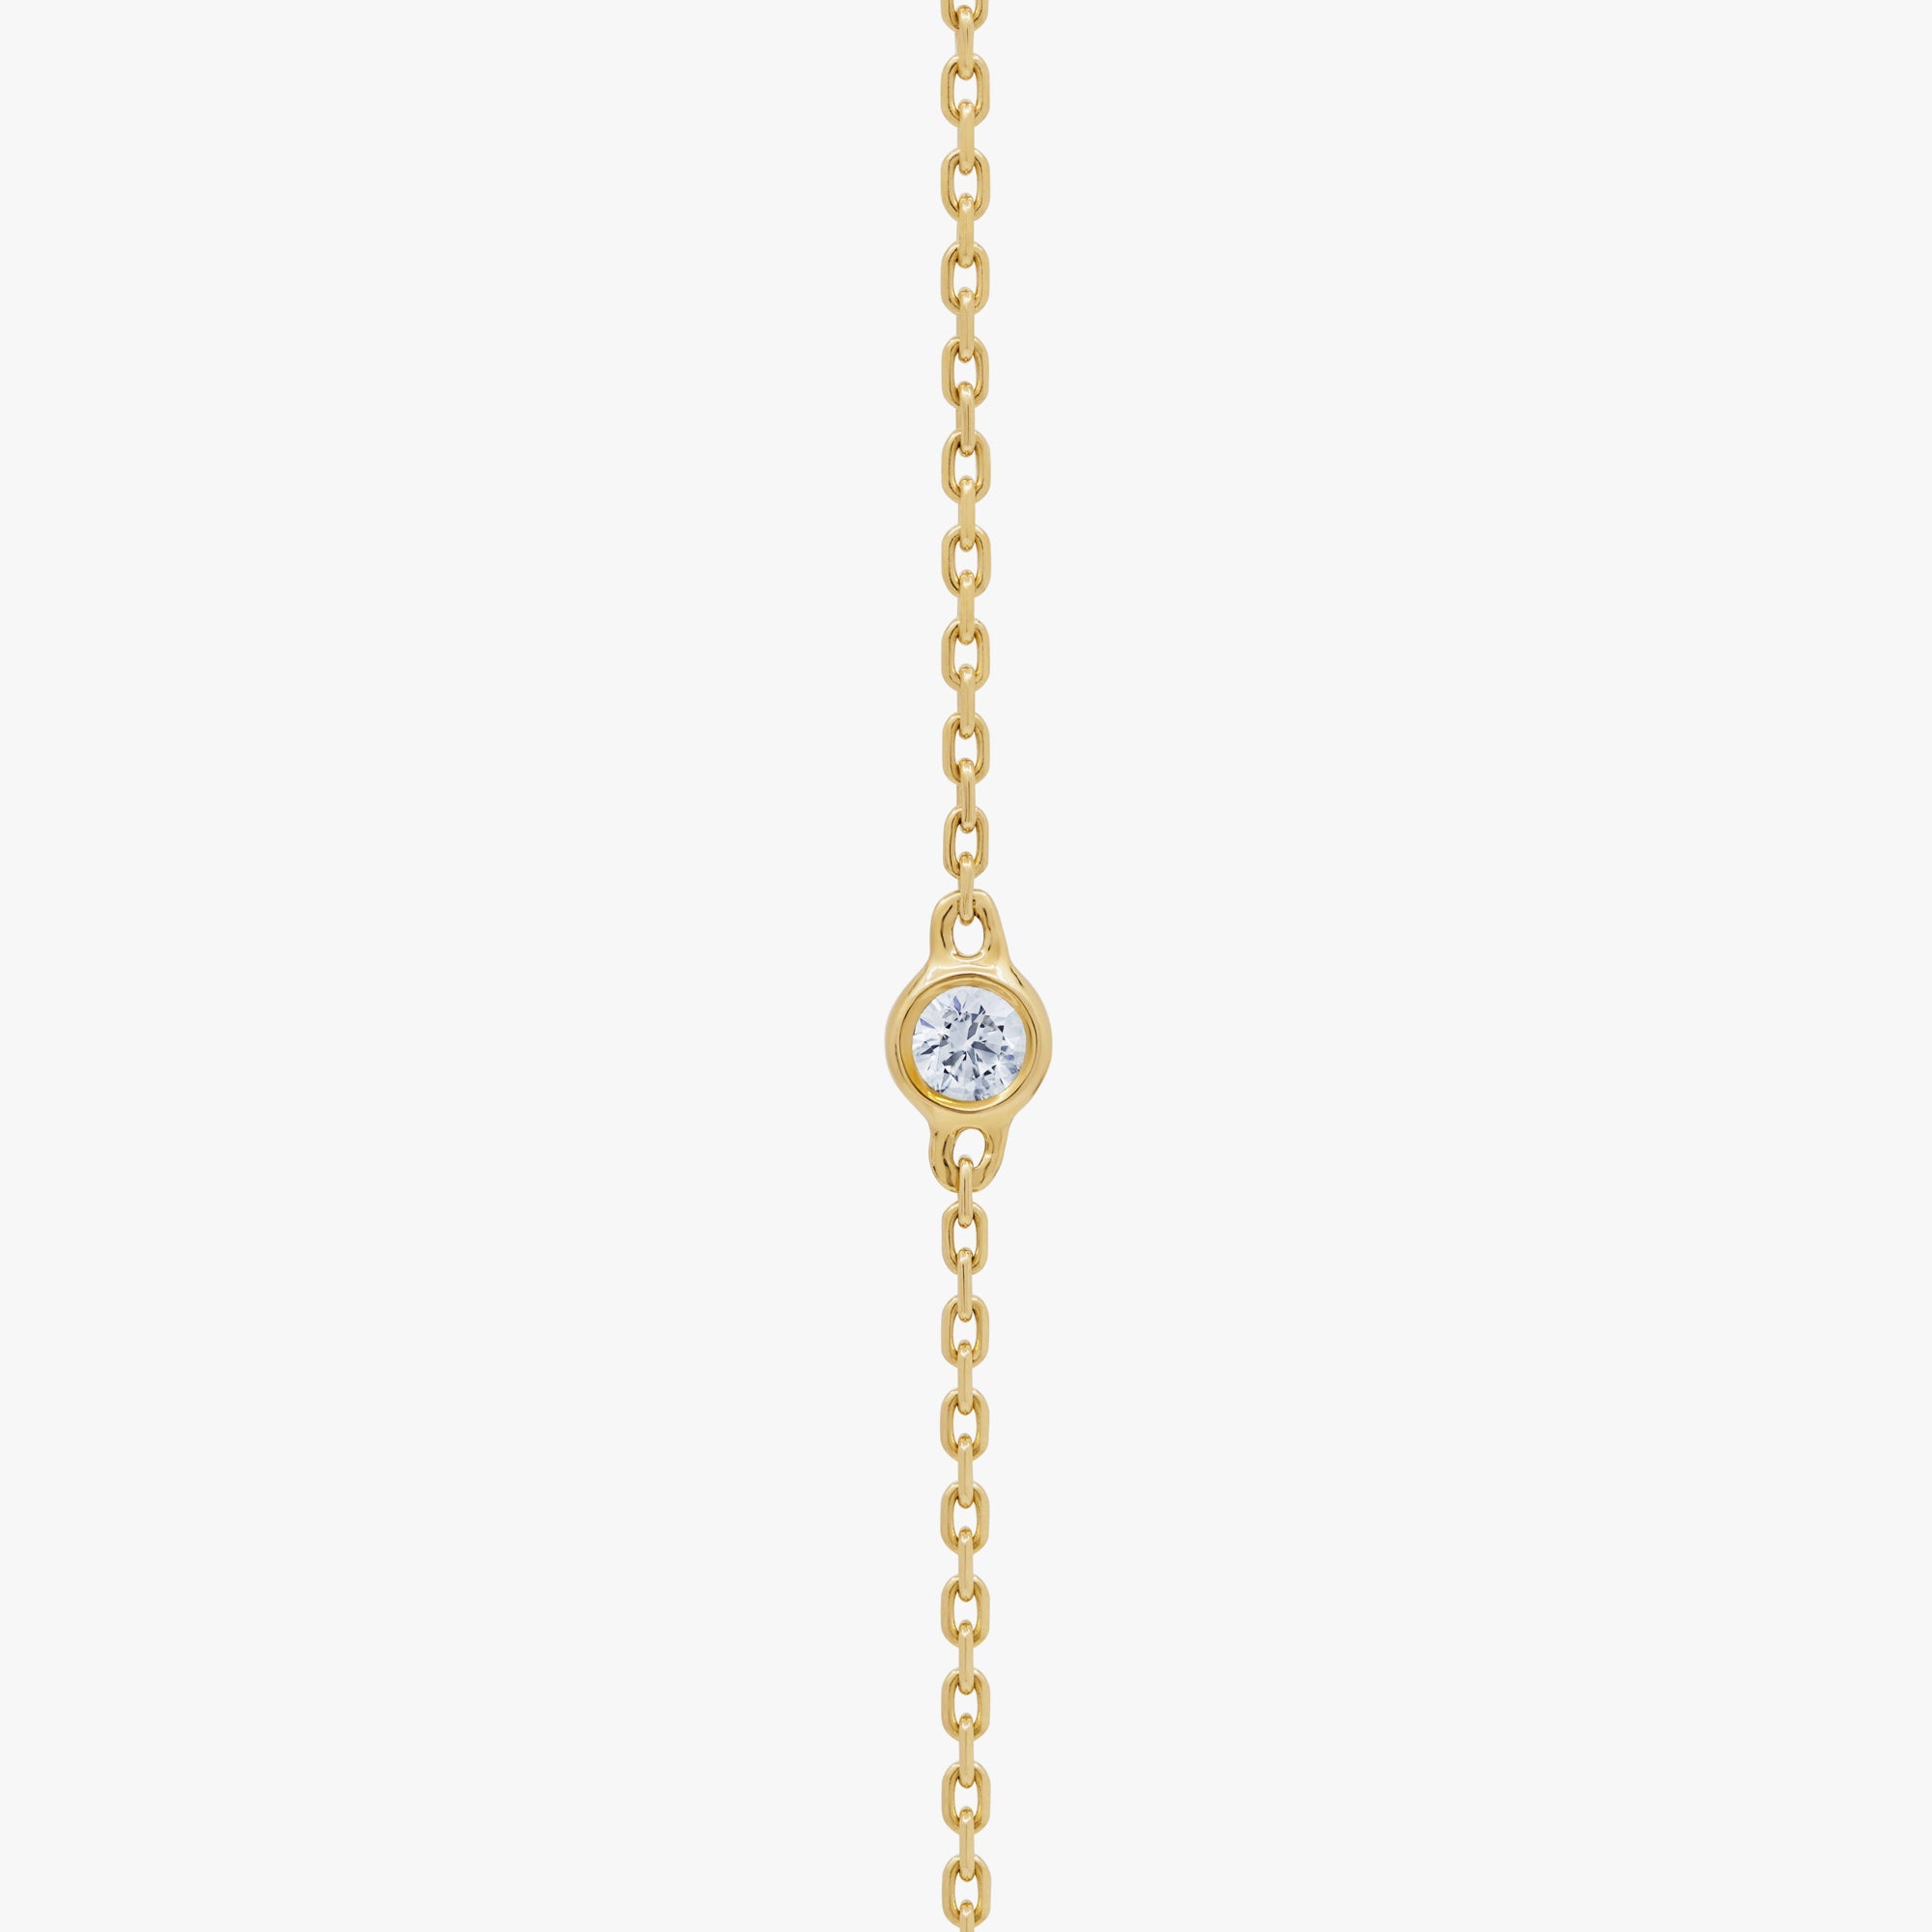 Nina Mariner Long Necklace In 18 Karat Yellow Gold With Natural White Diamonds And Turquoise Stones